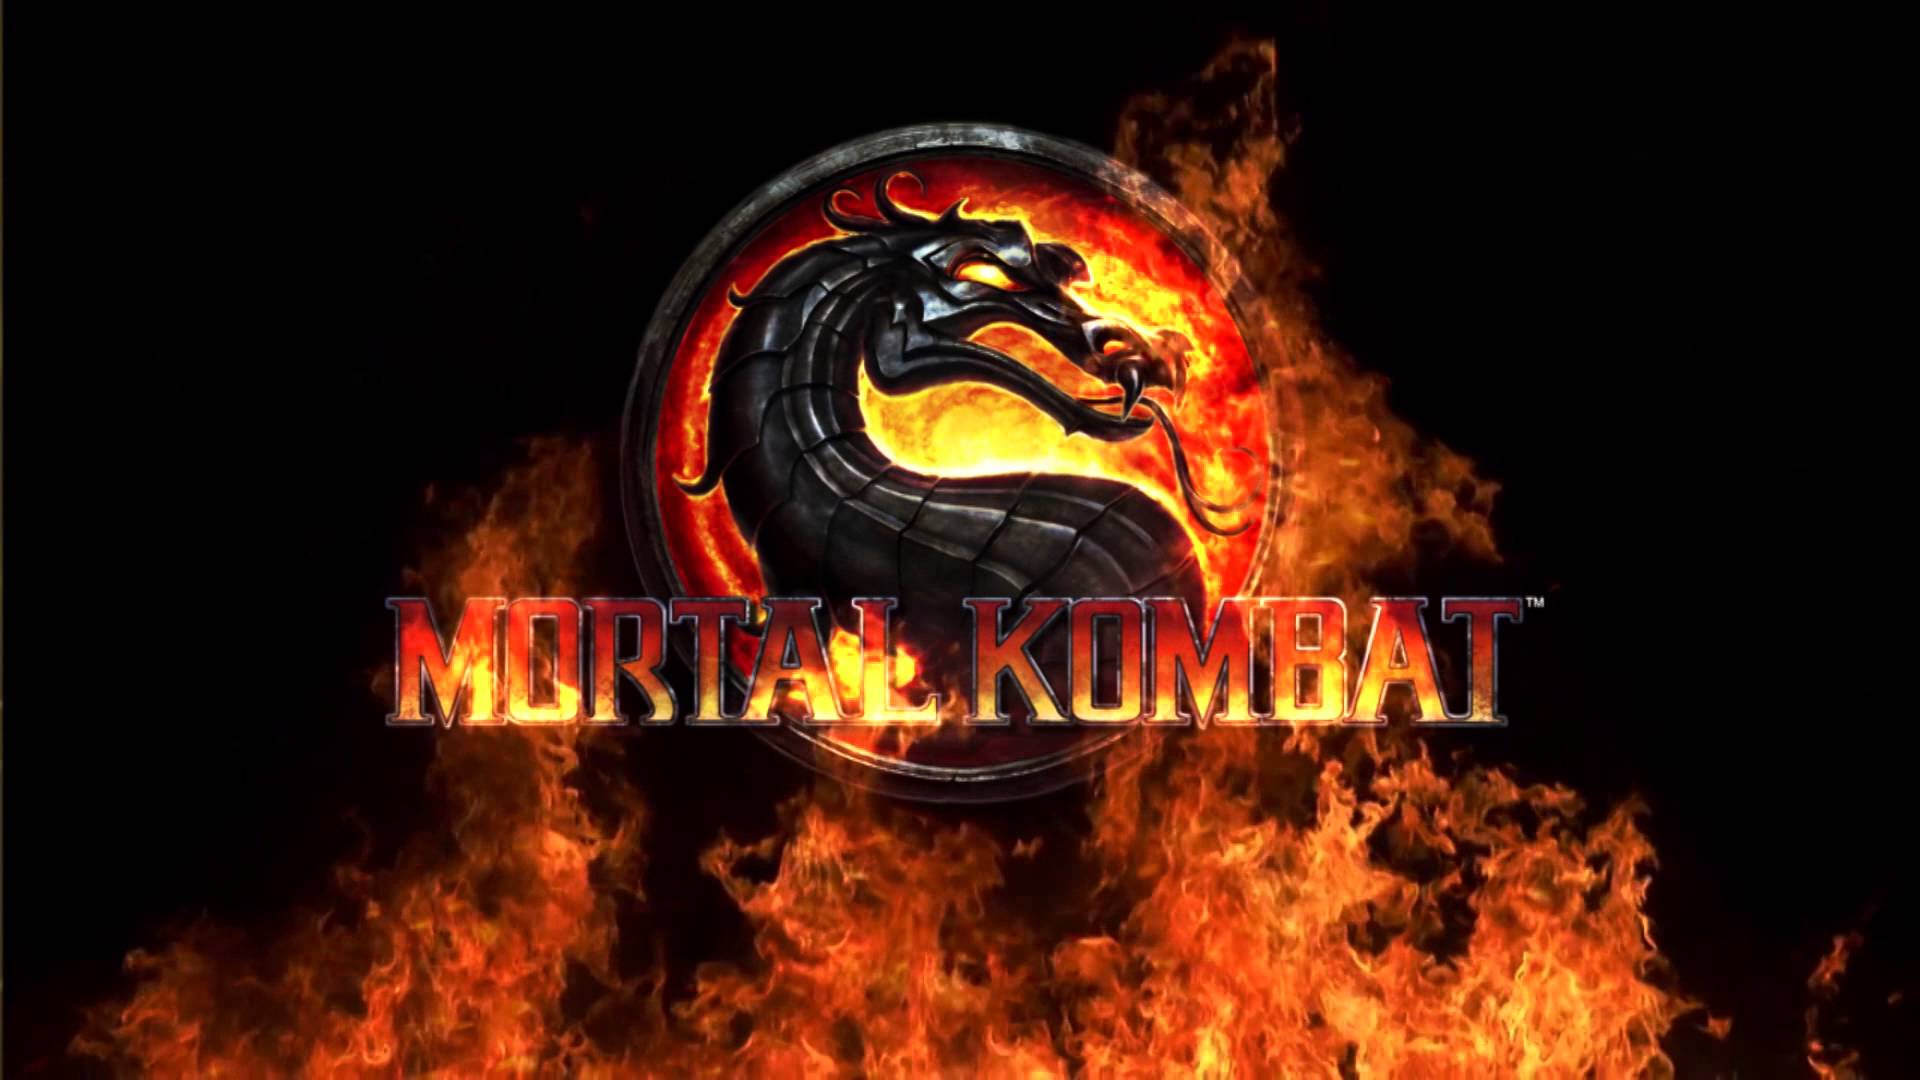 MK Dragon Logo - Did You Spot the 'Mortal Kombat' Easter Eggs in the 'Ready Player ...